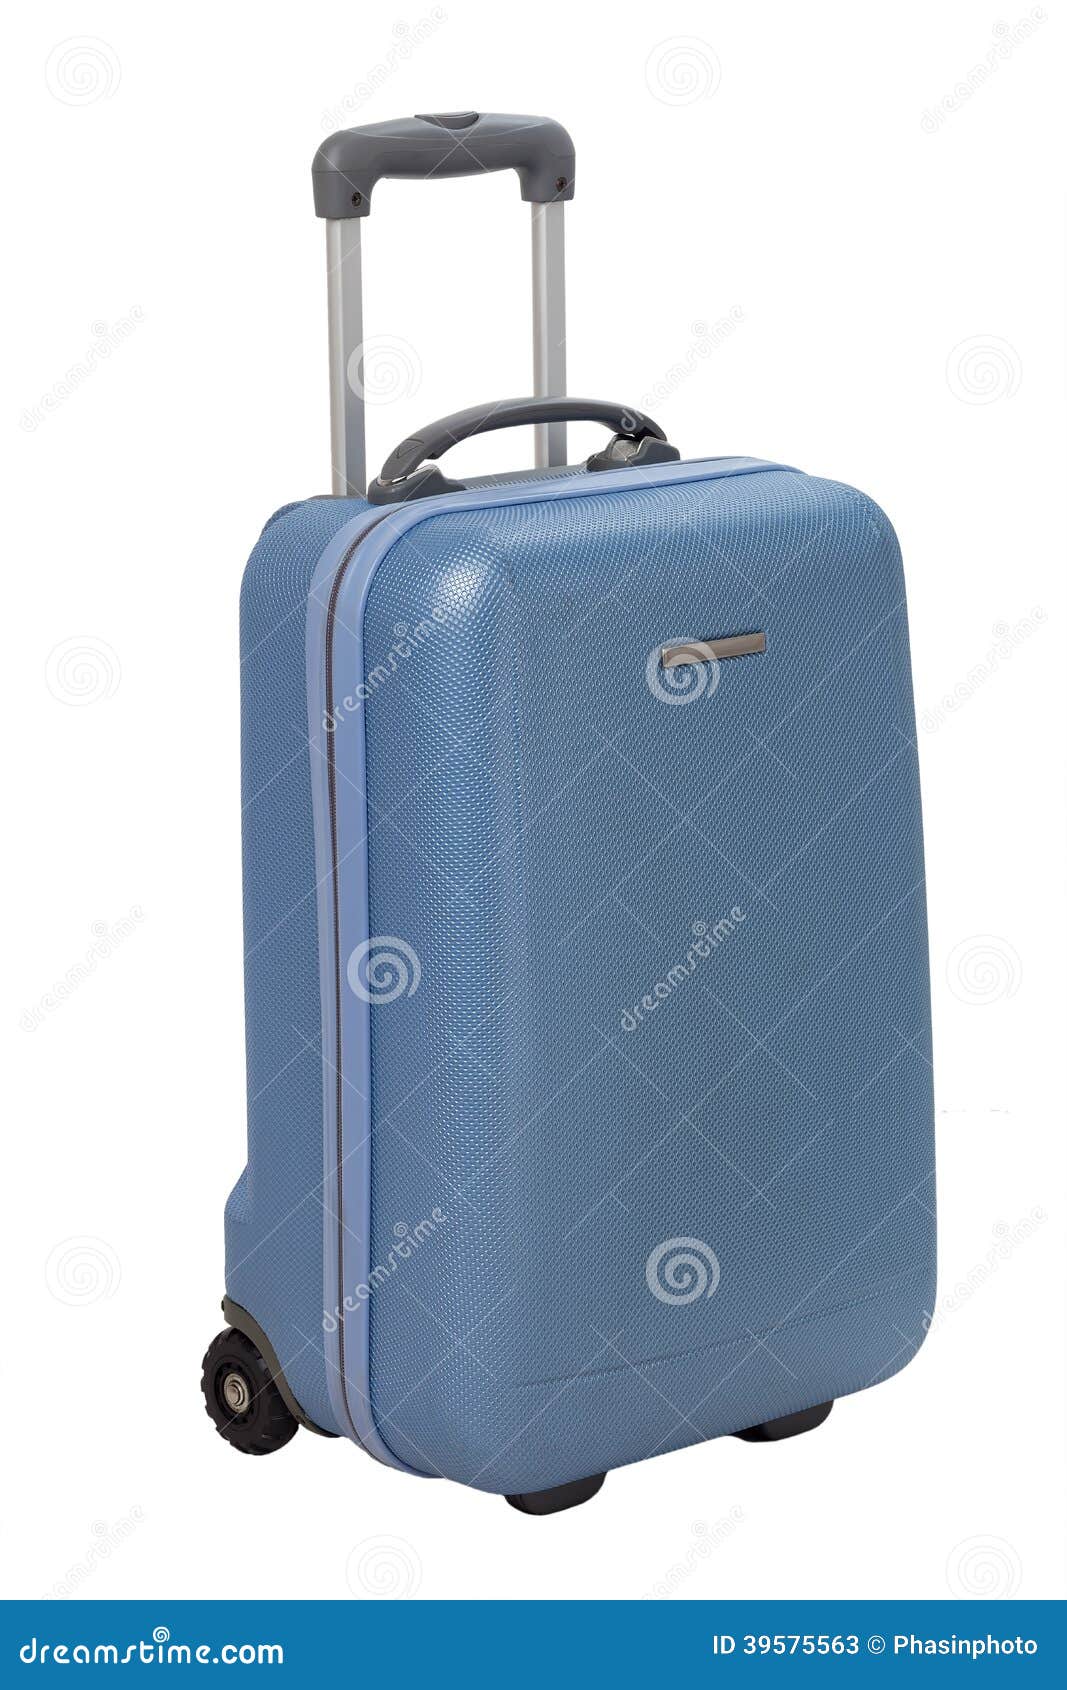 Suitcase isolated stock image. Image of briefcase, white - 39575563